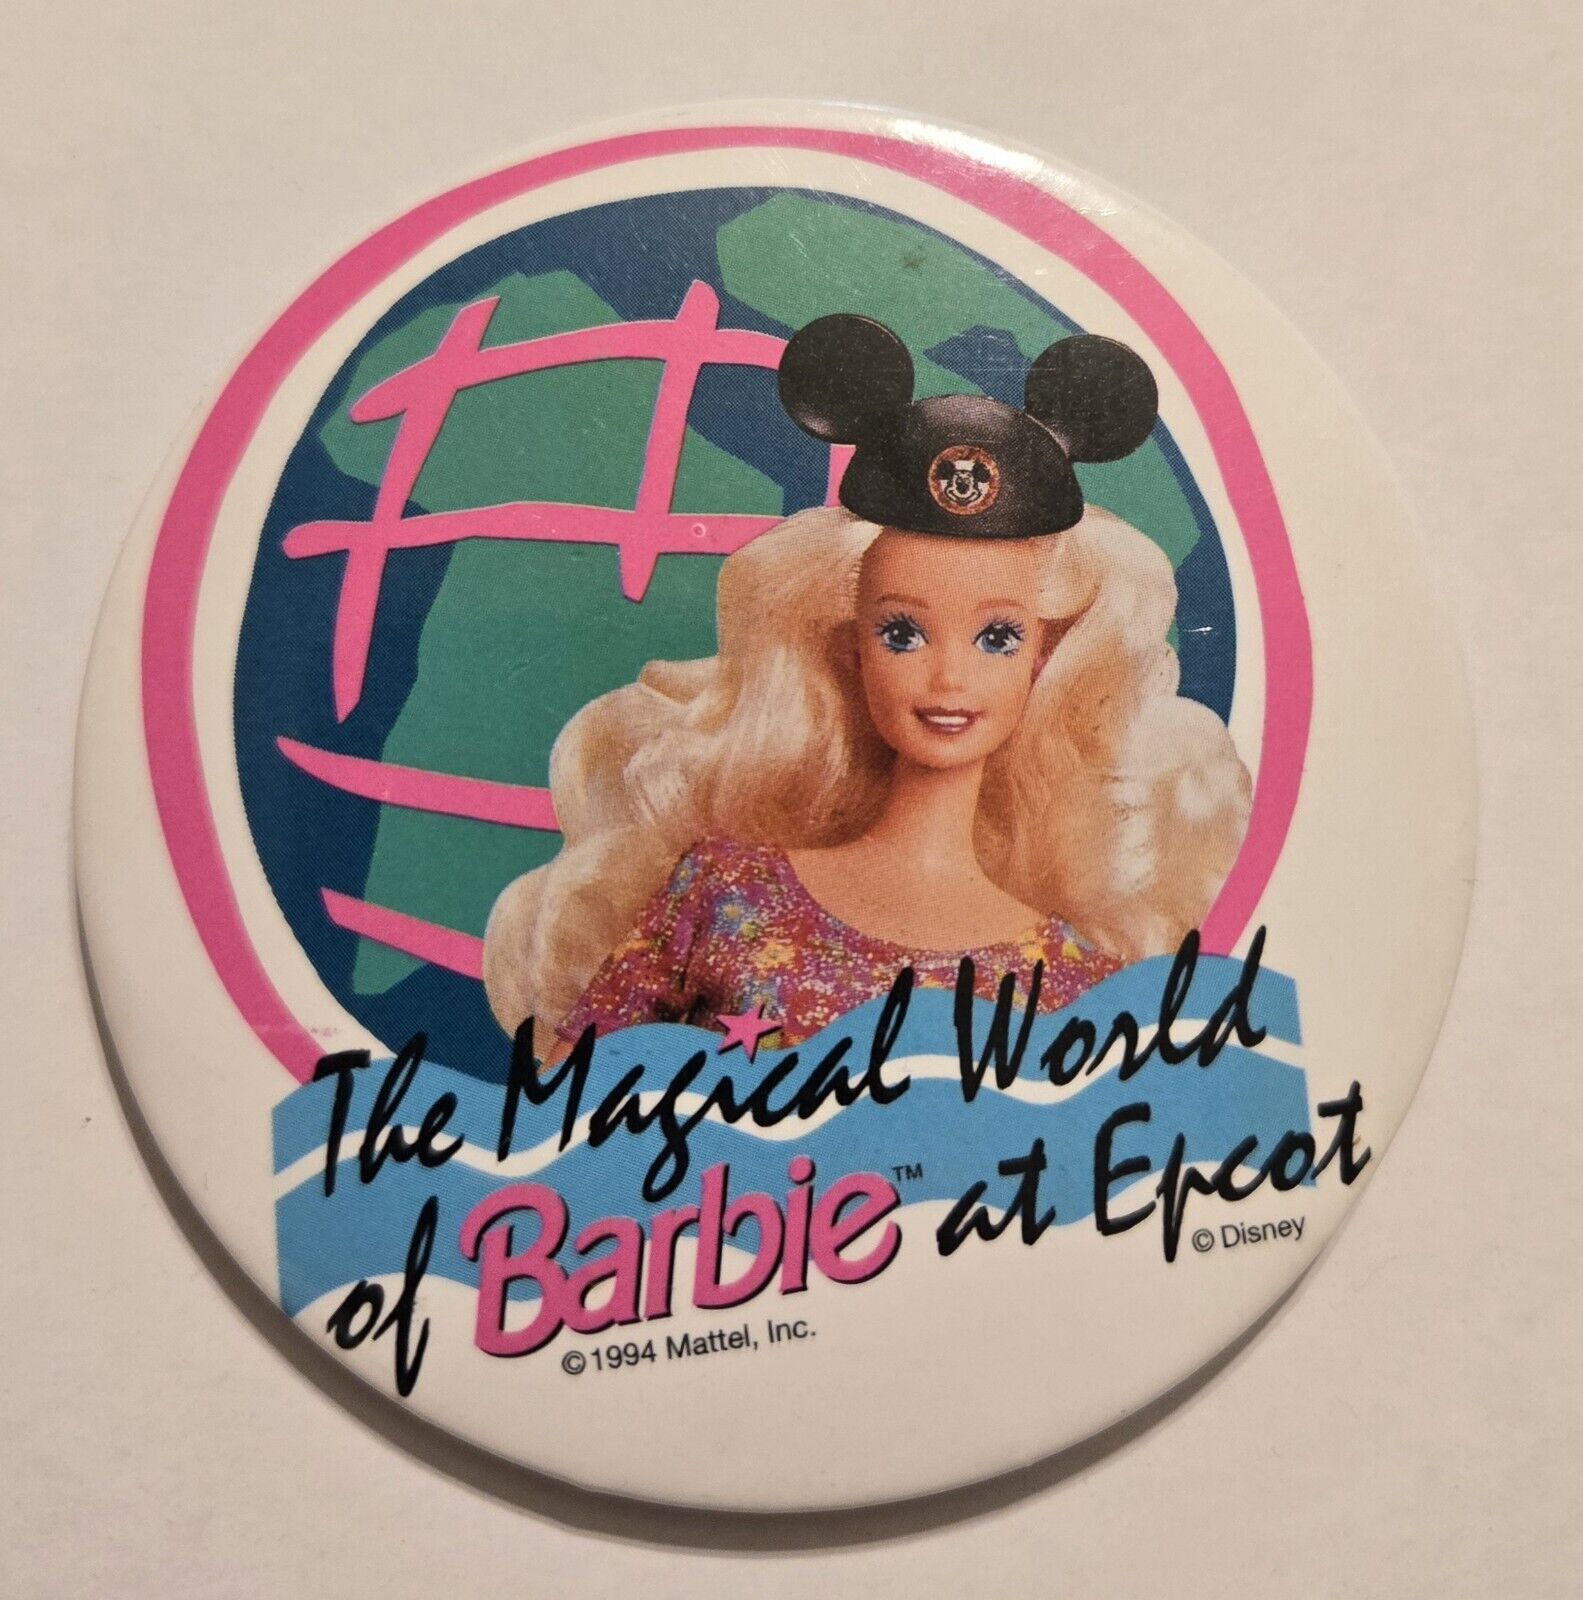 Nice Used Magical World of Barbie Disney 1994 EPCOT Pin Button Mattel